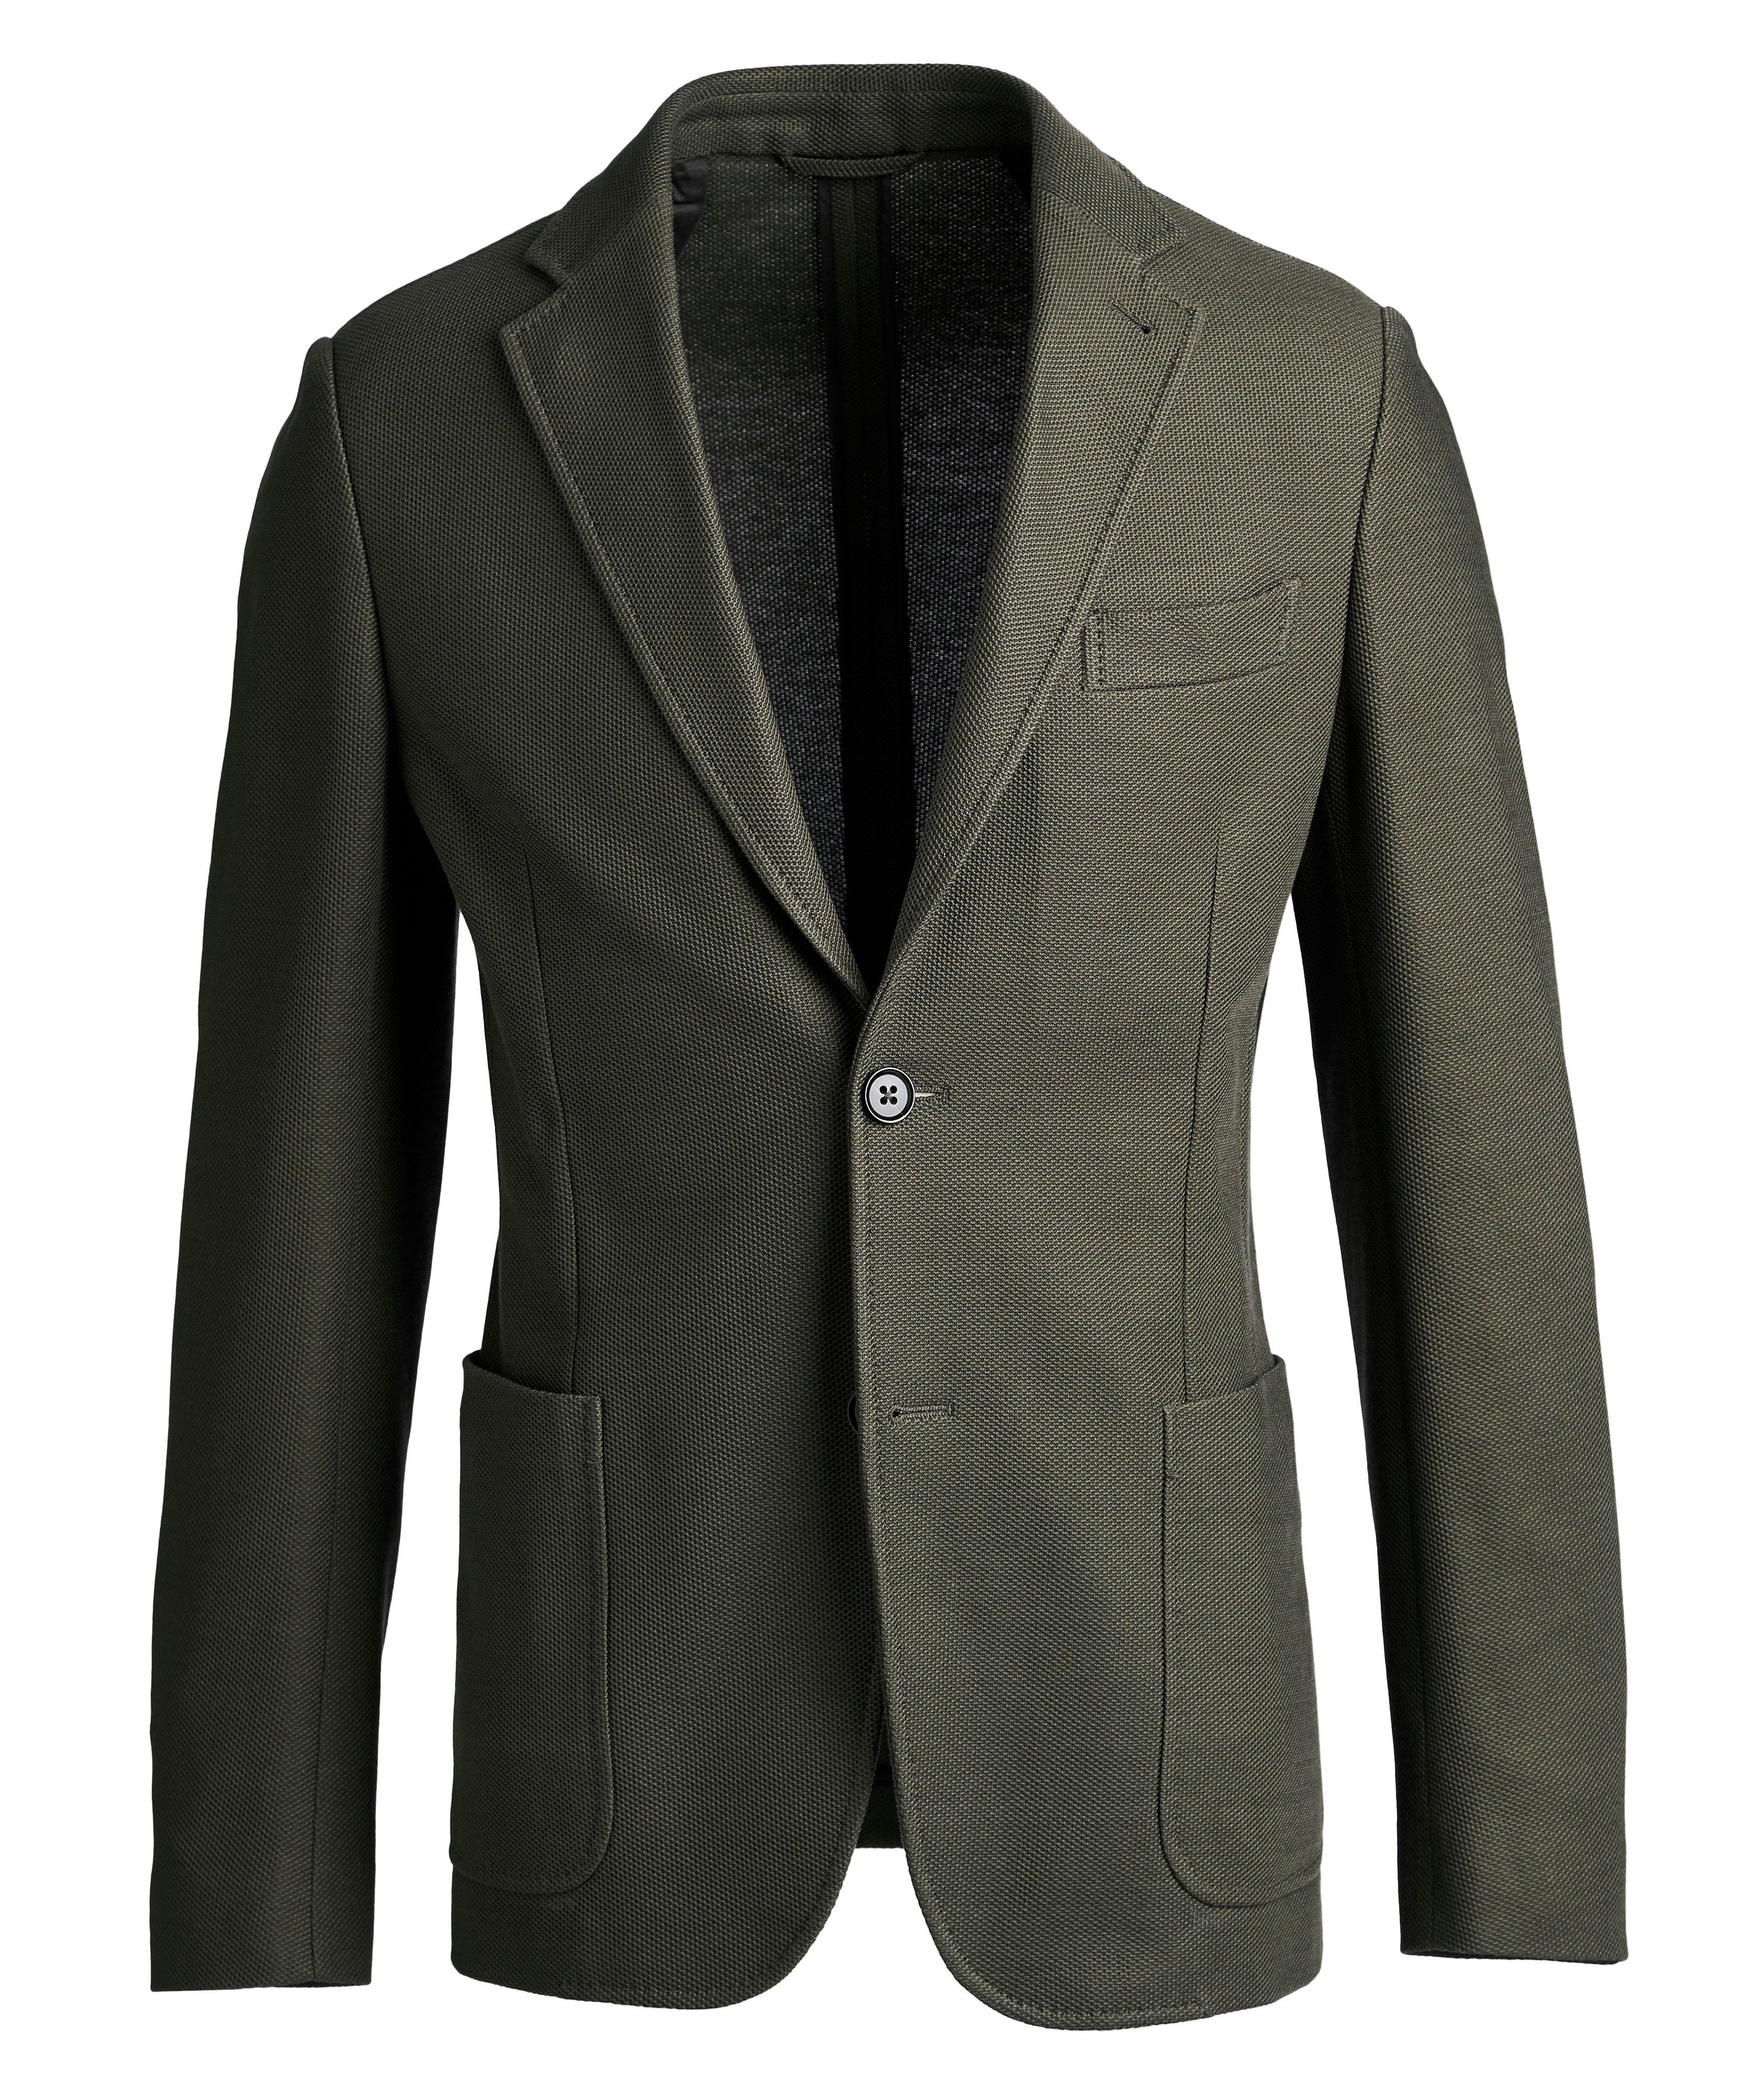 Unstructured Jersey Sports Jacket image 0